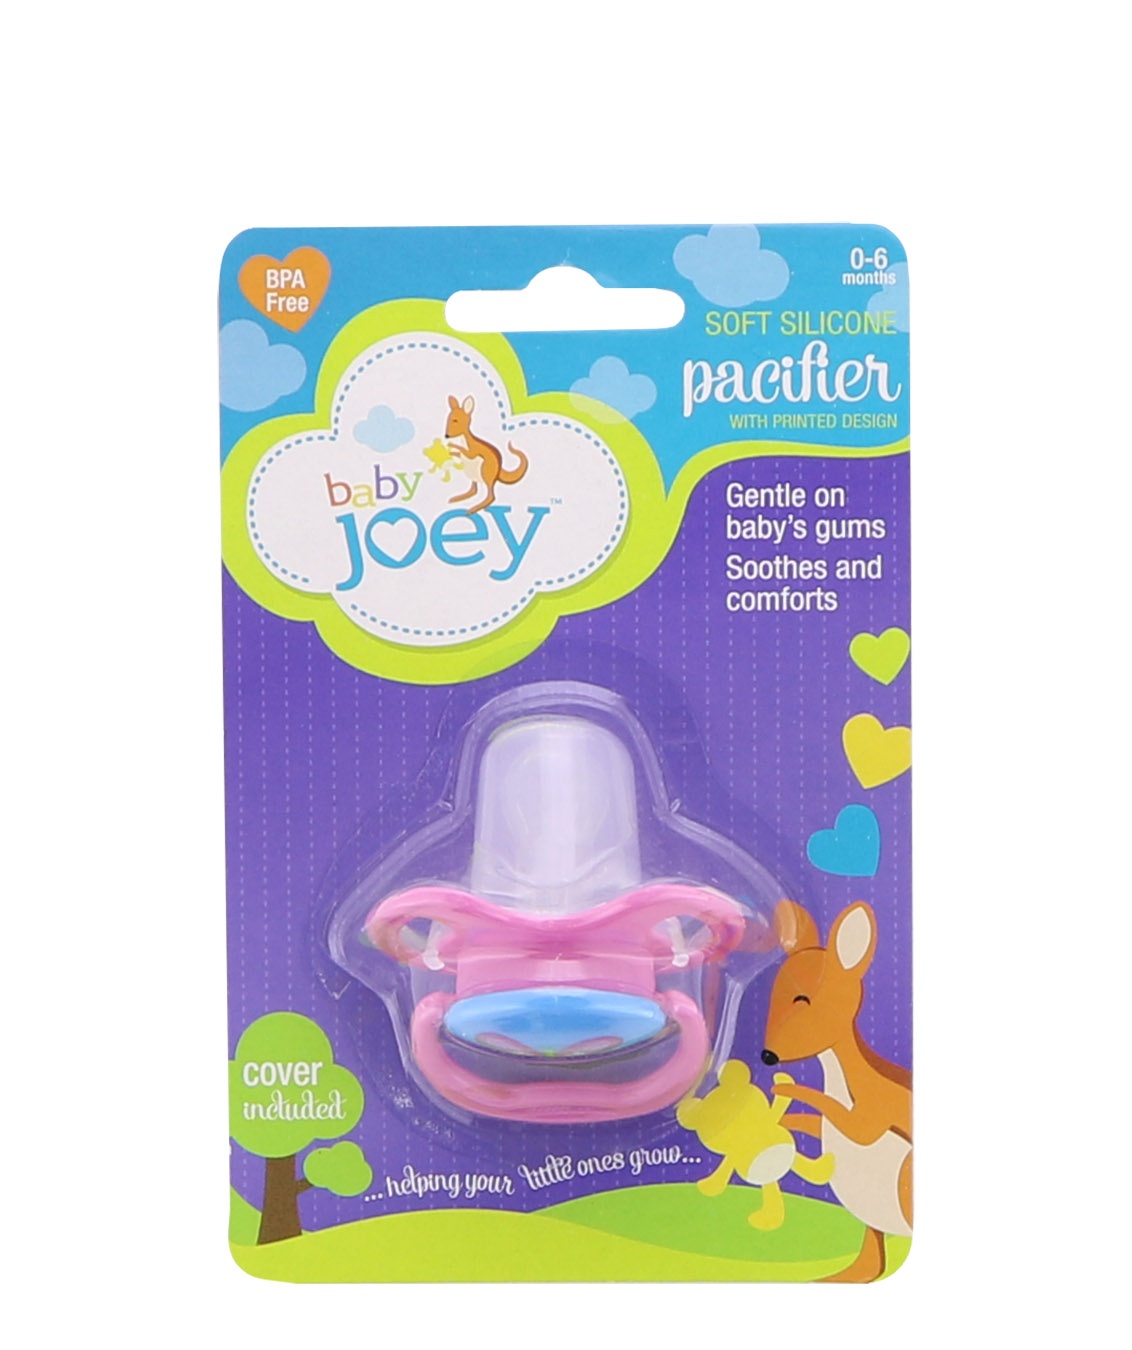 slide 1 of 1, Baby Joey Silcn Infant Pacifier Prin, 1 ct